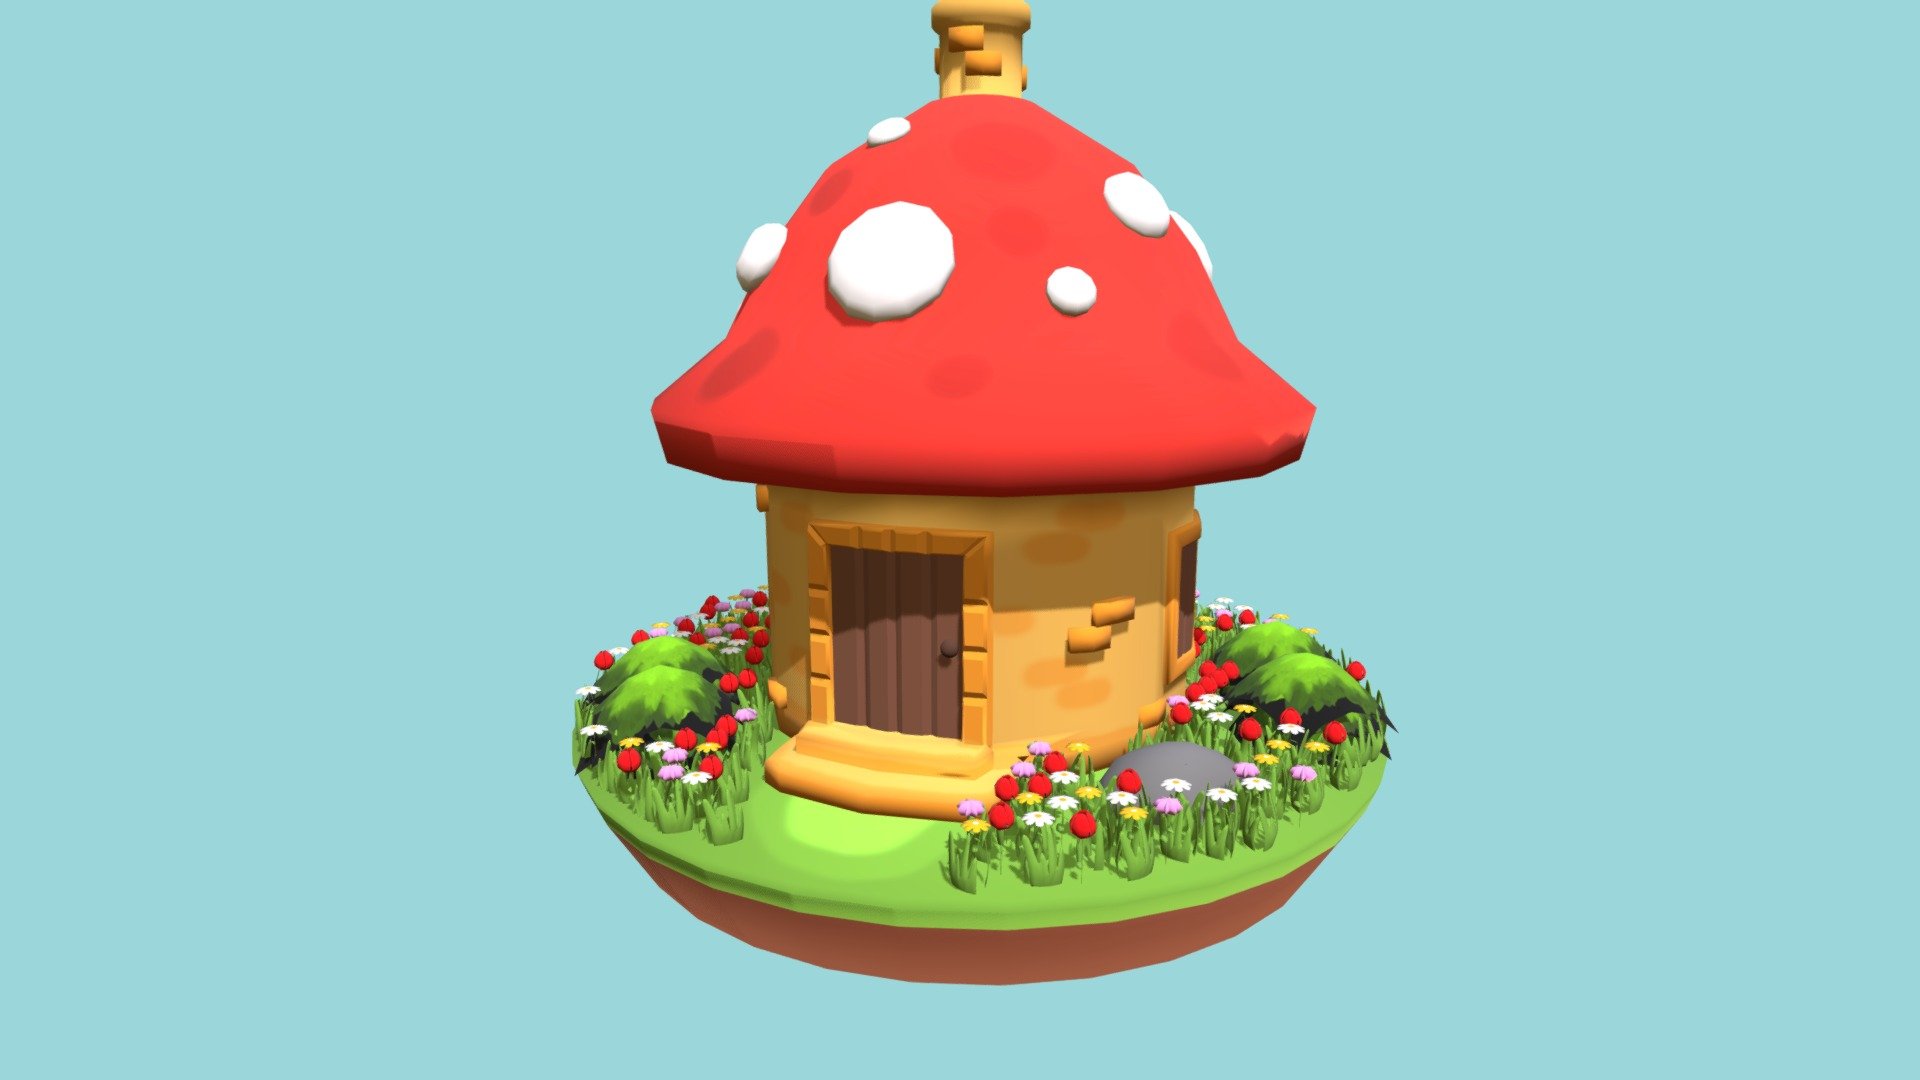 Cute mushroom house used by a little elf, surrounded by flowers and green grass 3d model